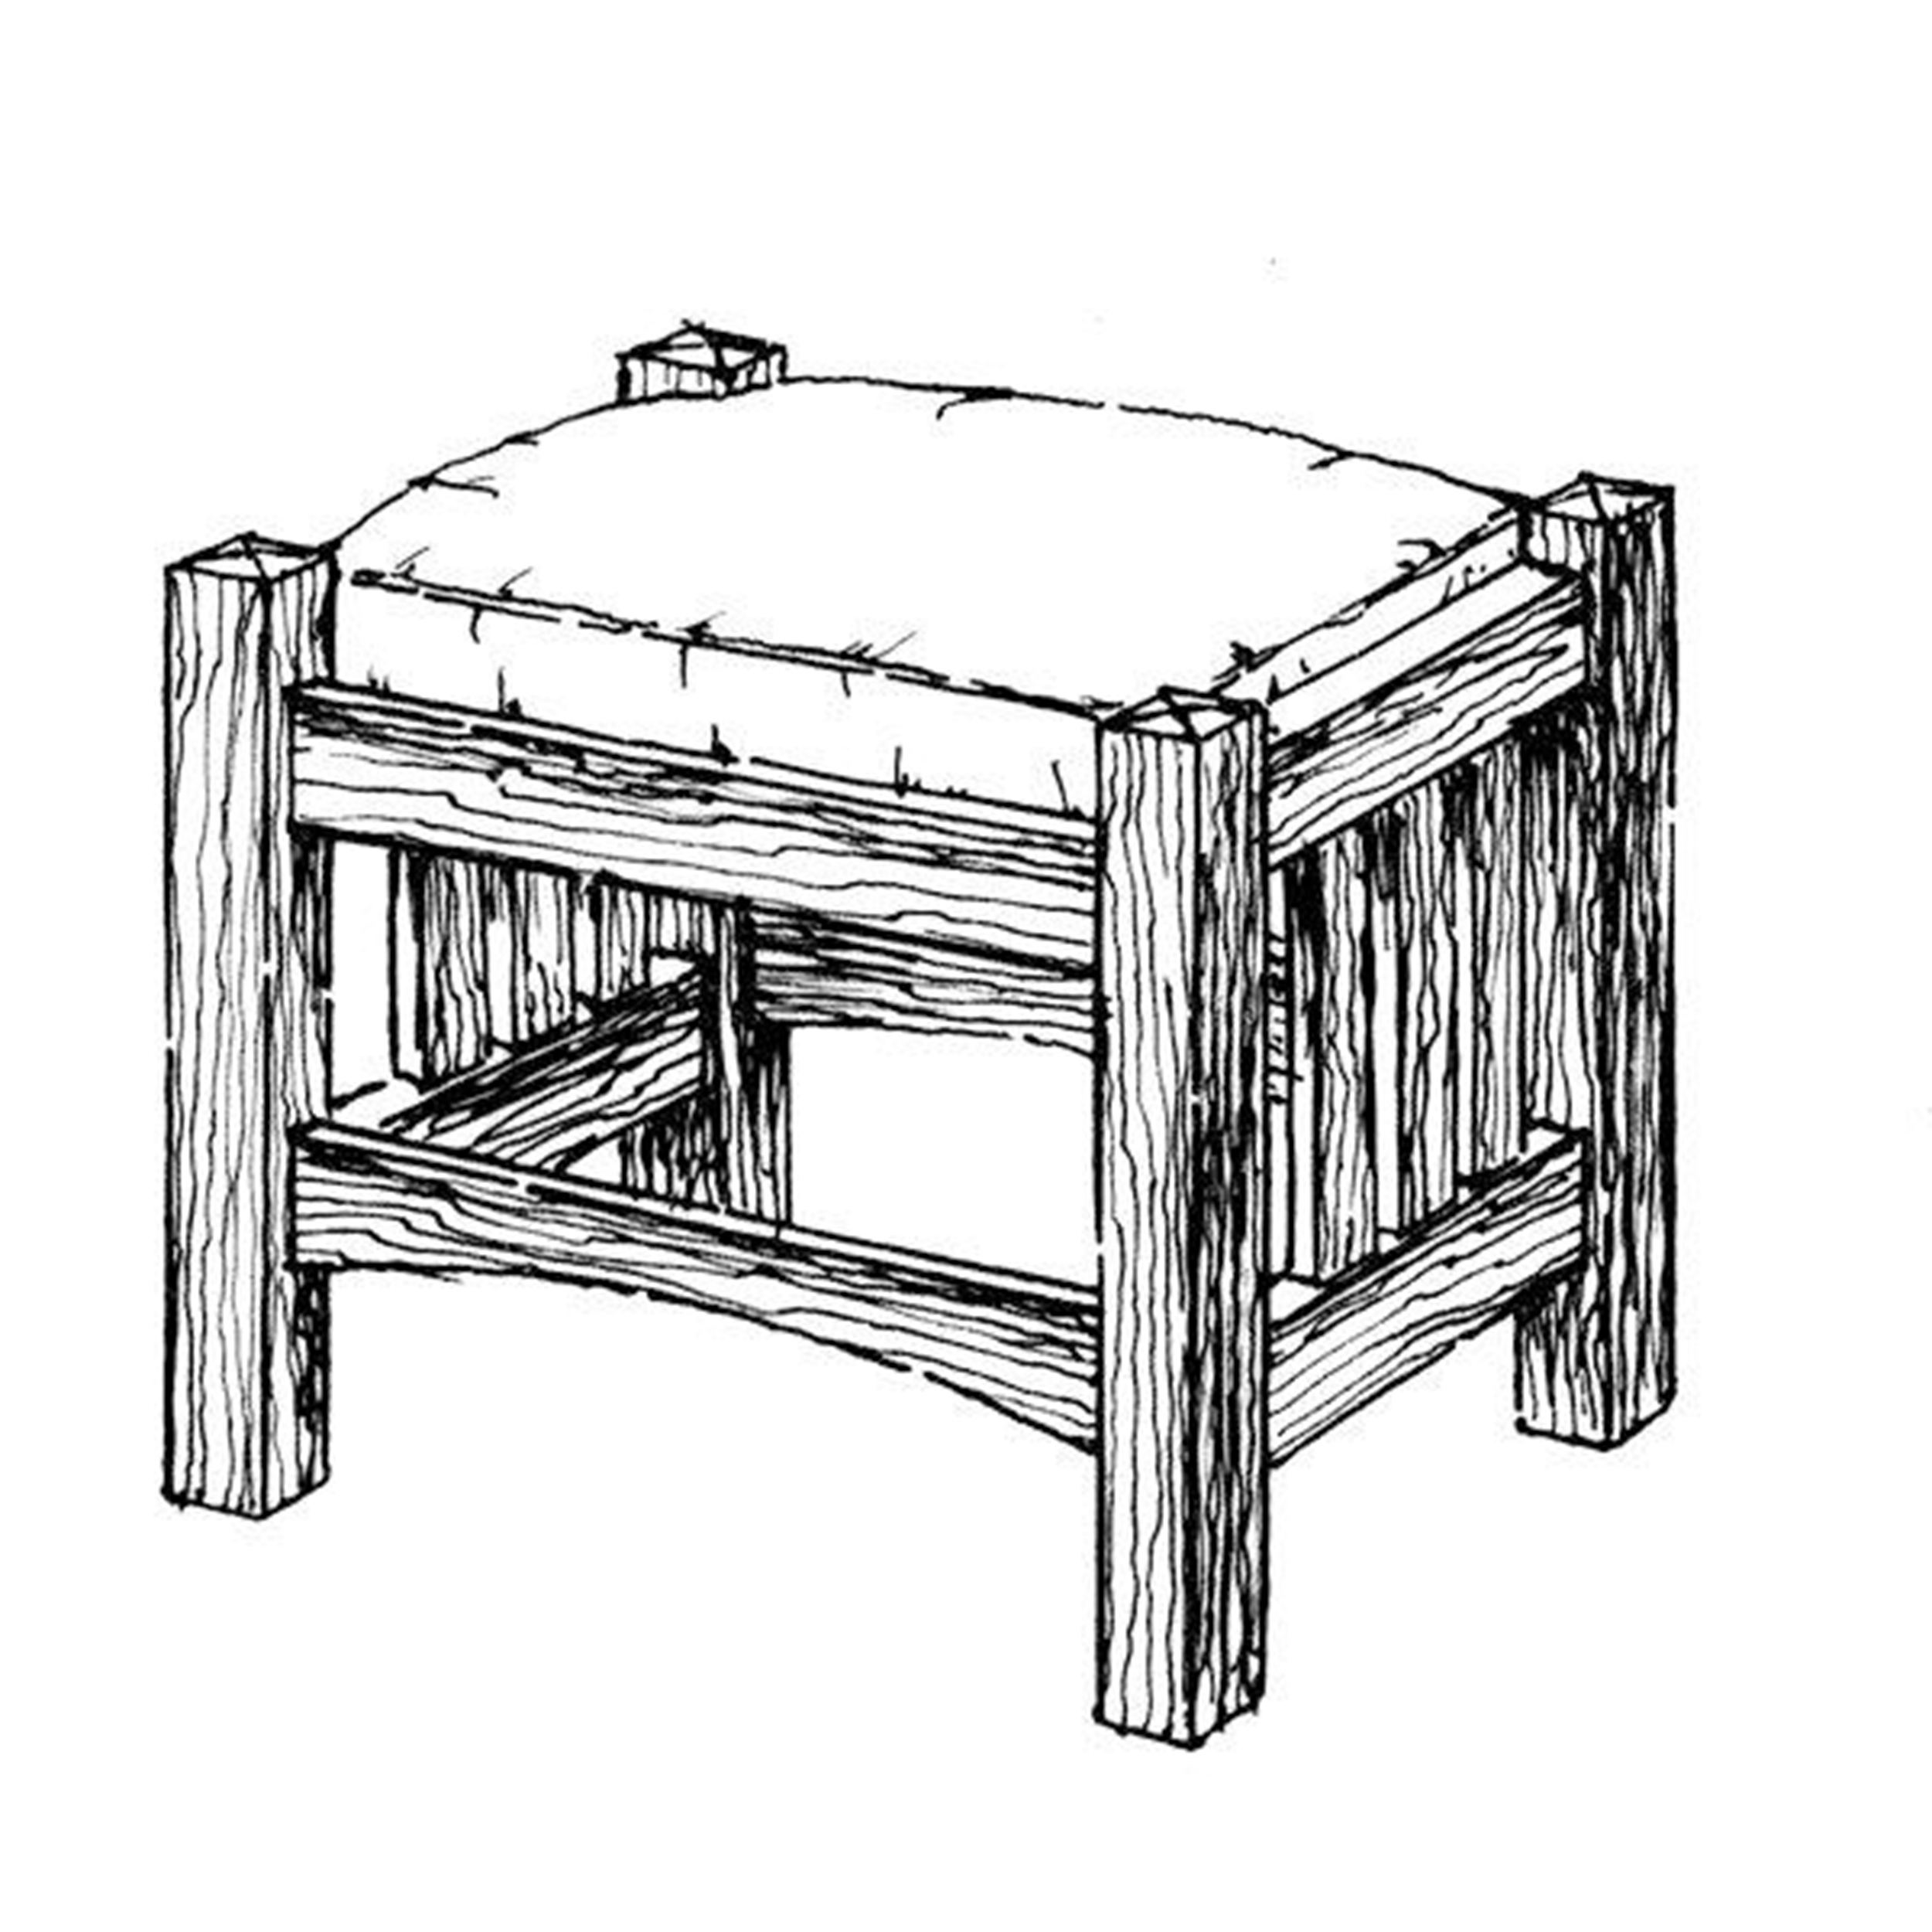 Woodworking Project Paper Plan To Build Foot Rest For Morris Chair